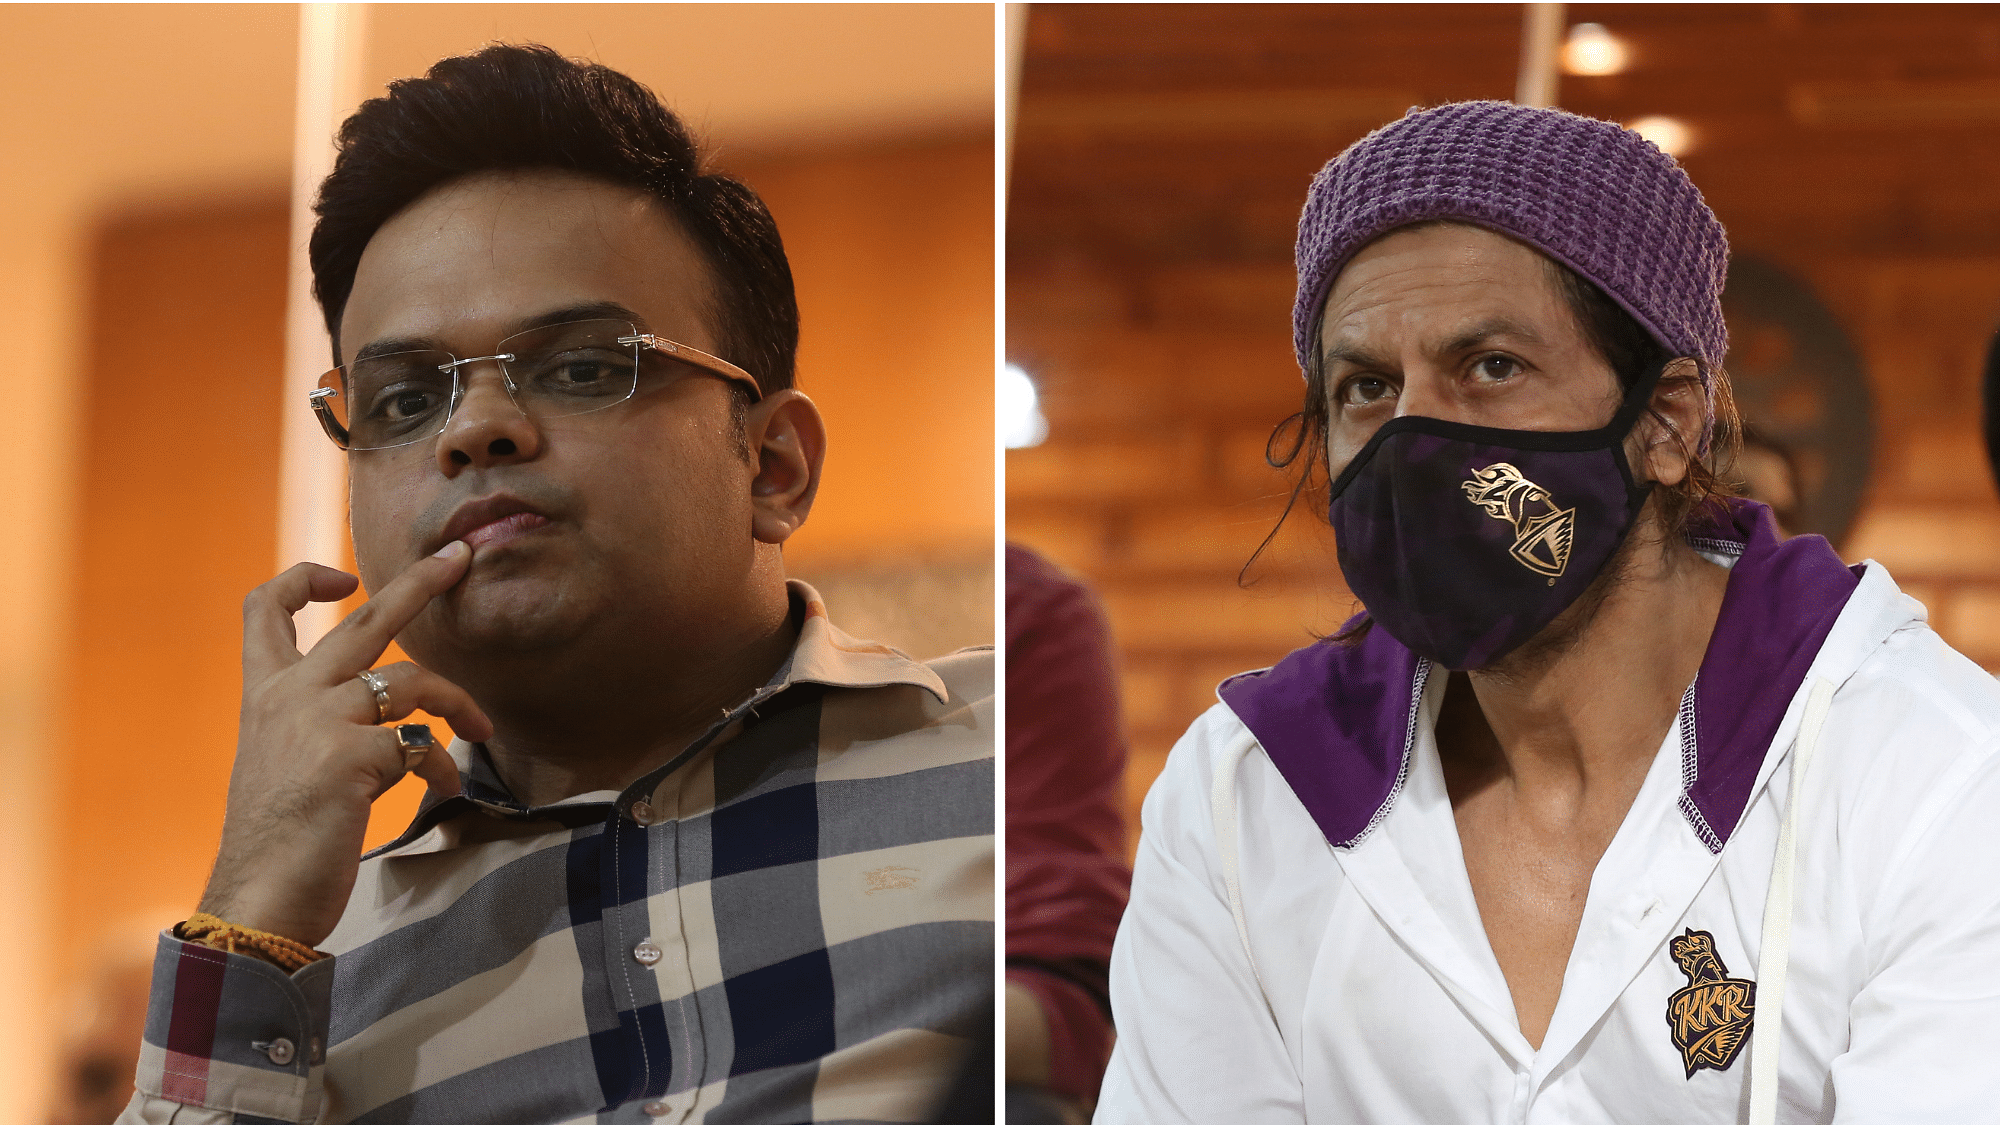 BCCI Secretary Jay Shah and Bollywood actor Shahrukh Khan were spotted in the stands during the IPL 2020 match between KKR and RCB.